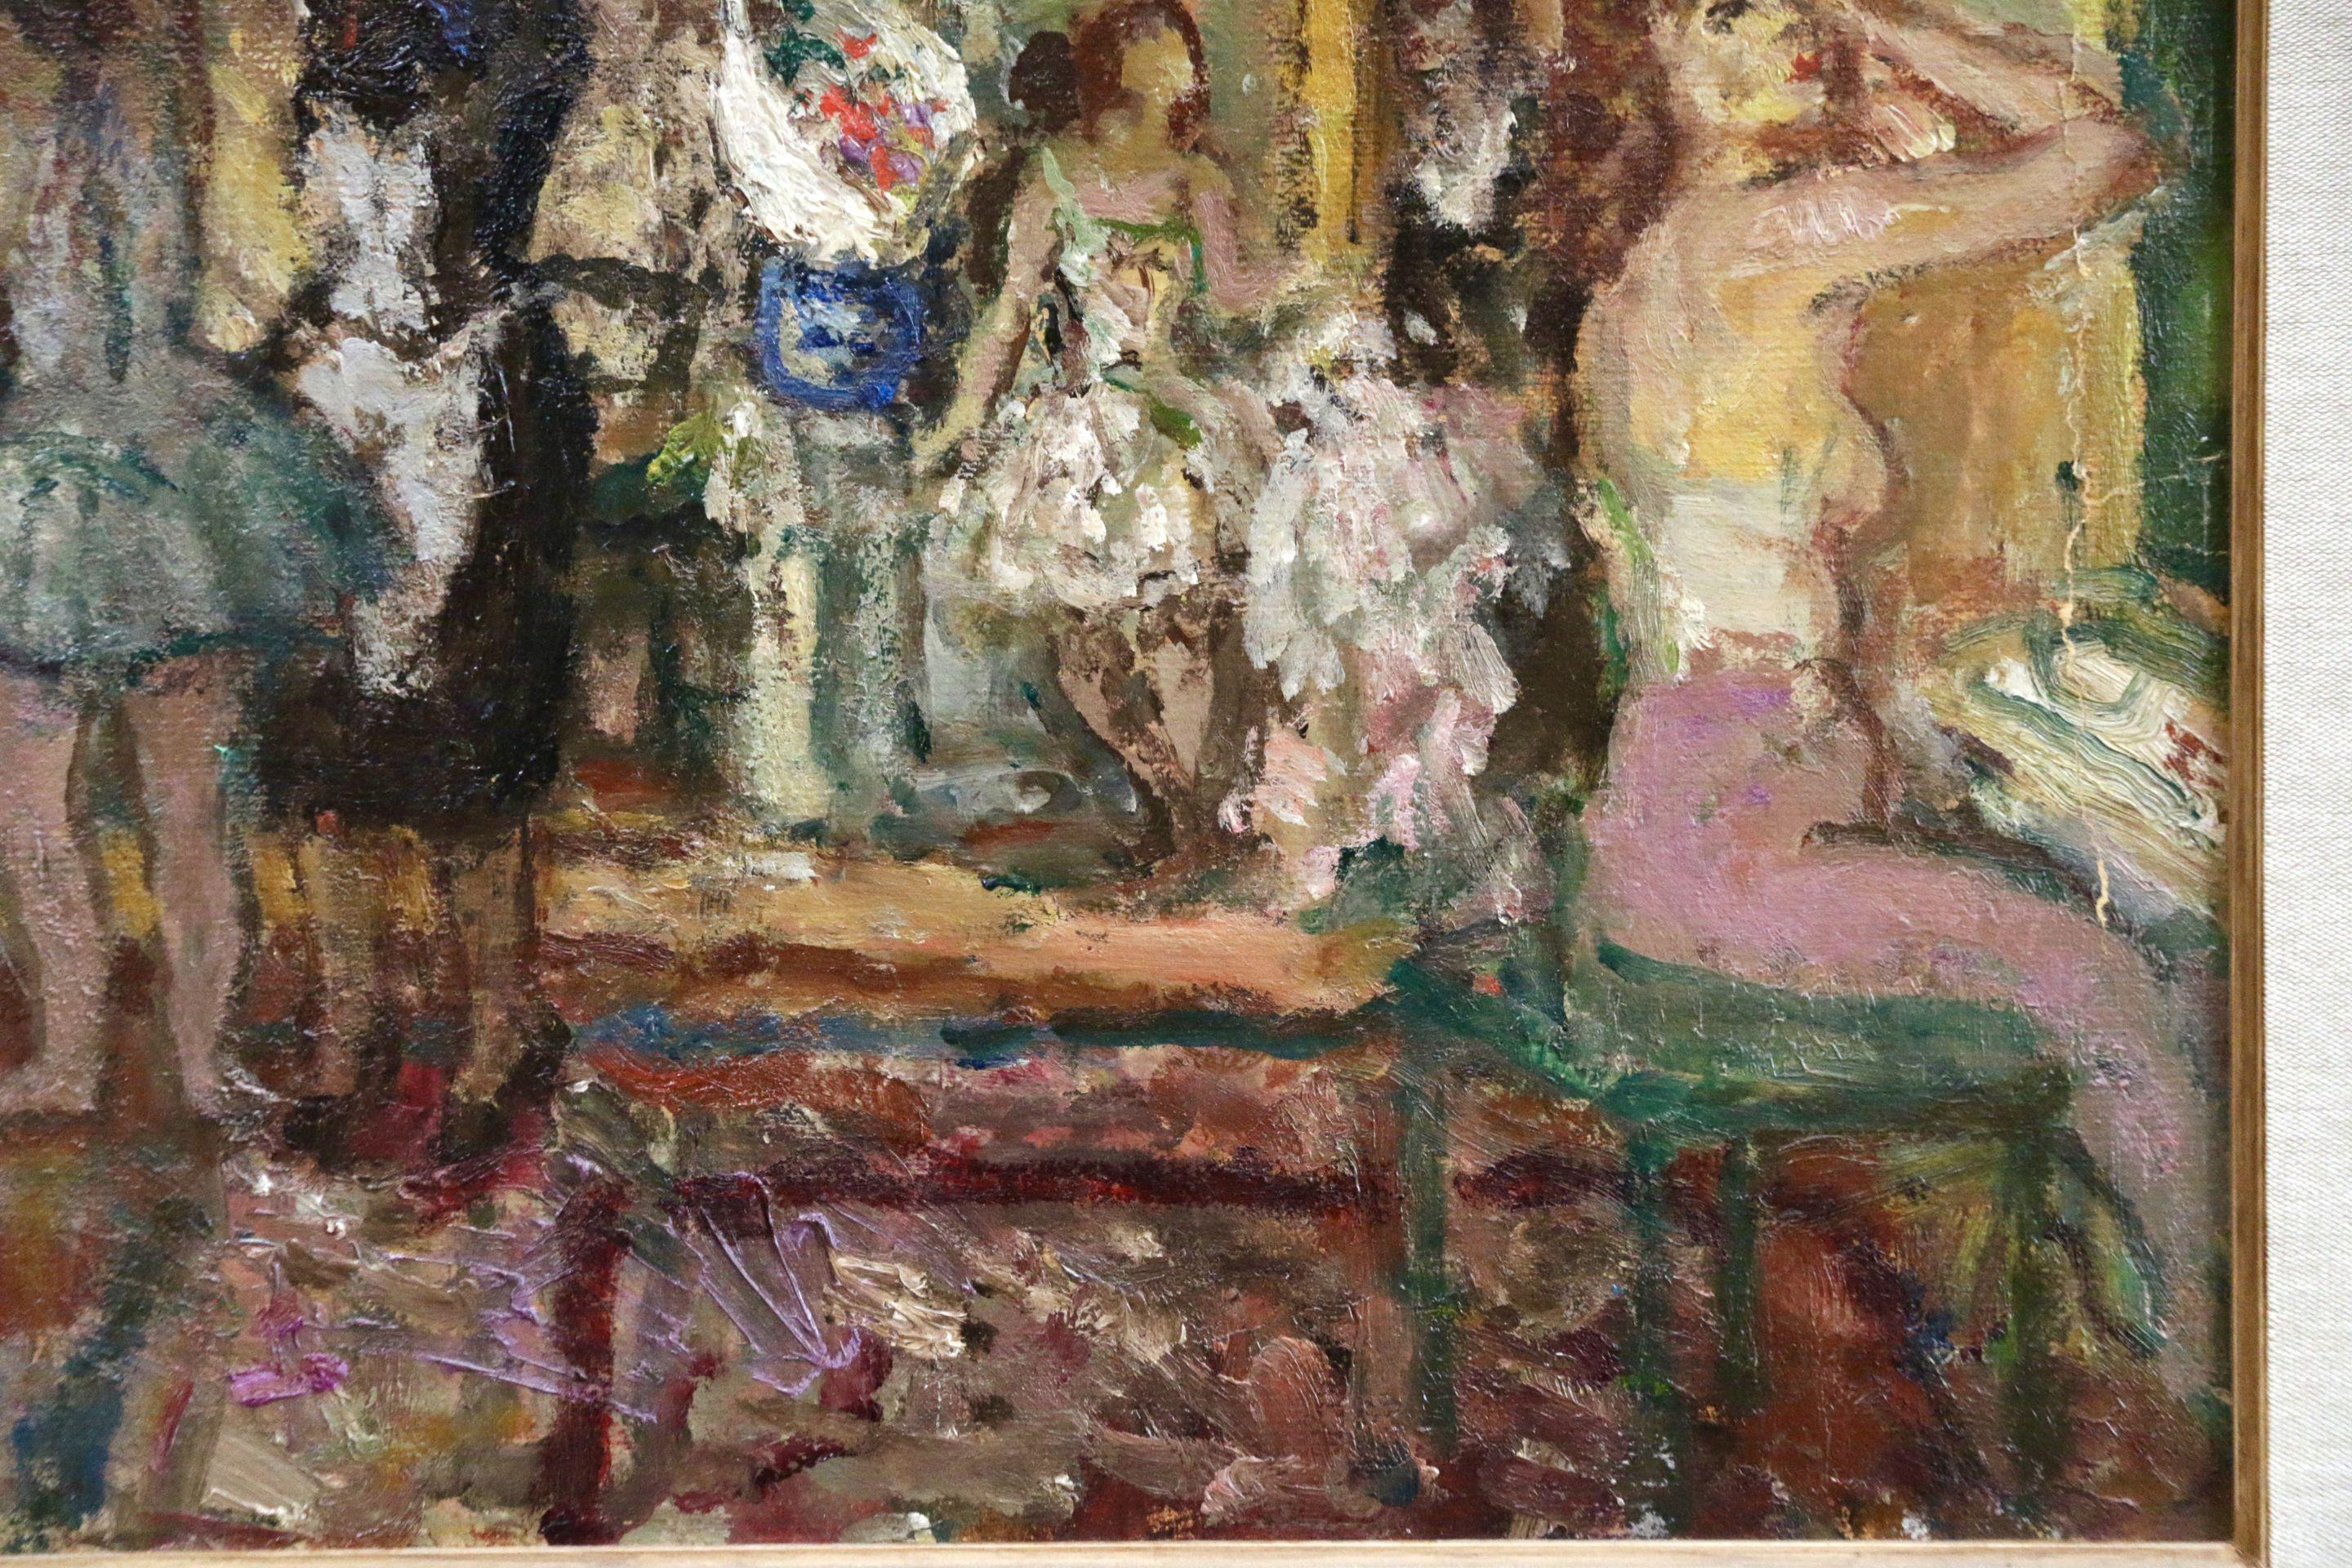 Dancers in Dressing Room - Mid 20th Century Oil, Figures in Interior by Cosson - Post-Impressionist Painting by Jean-Louis-Marcel Cosson